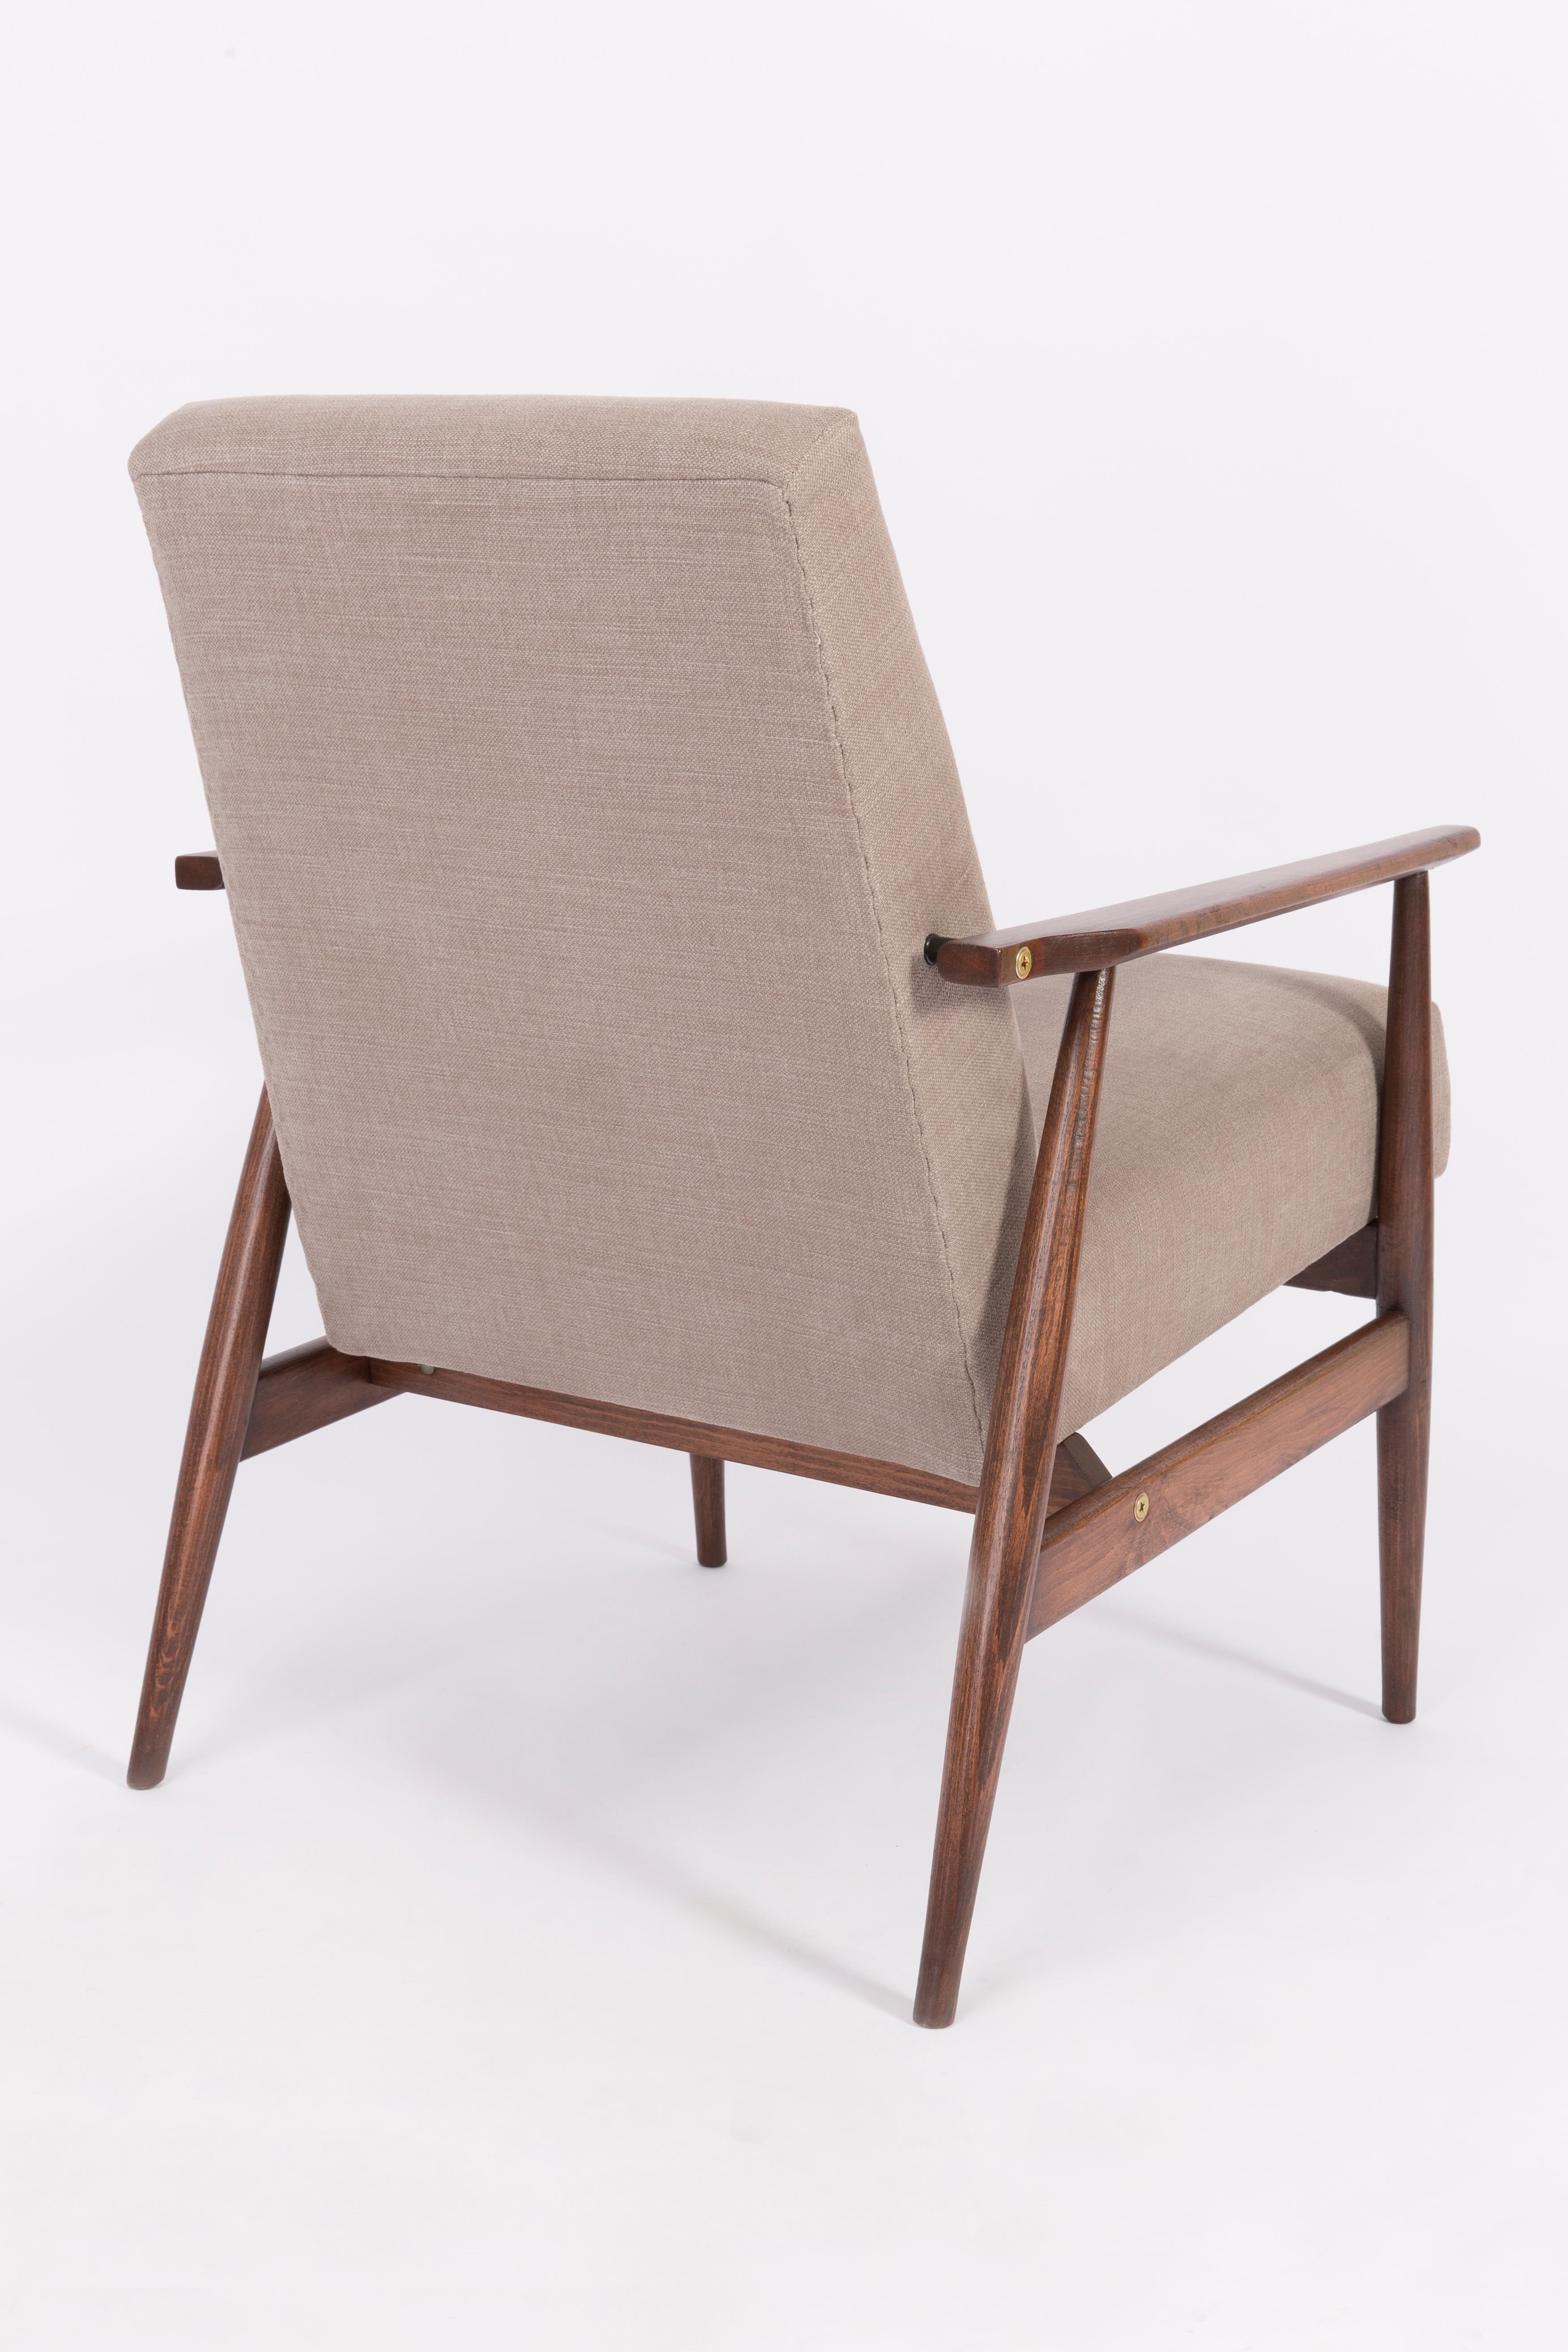 Hand-Crafted 20th Century Beige Dante Armchair, H. Lis, 1960s For Sale